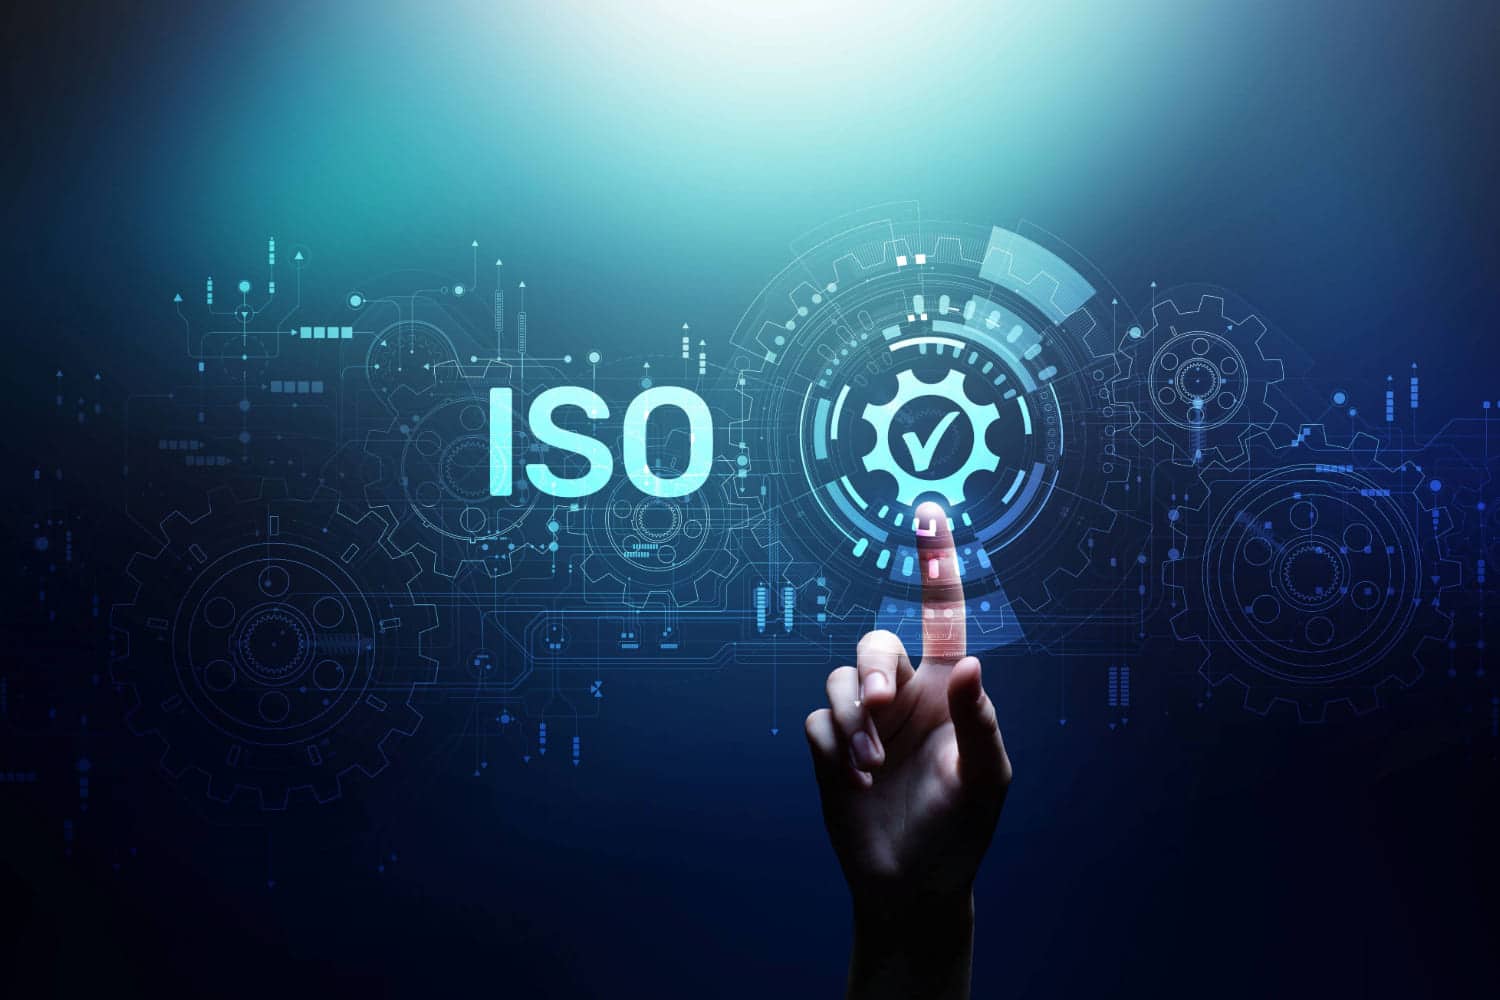 TrustCloud | ISO 27001: What is the purpose of this security standard 